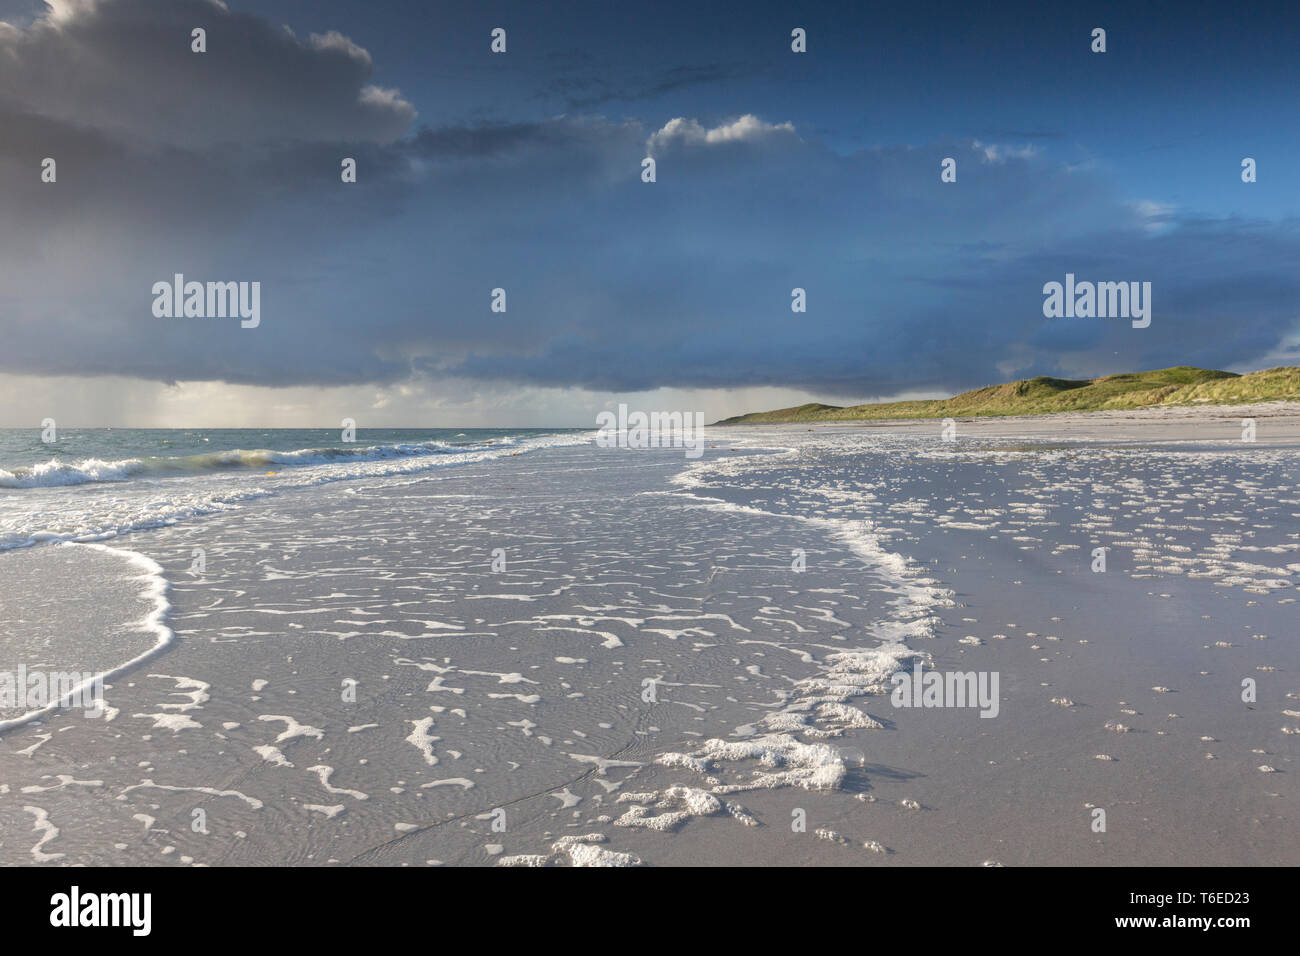 Evening beach scene at Boisdale, Isle of South Uist, Scotland. Stock Photo